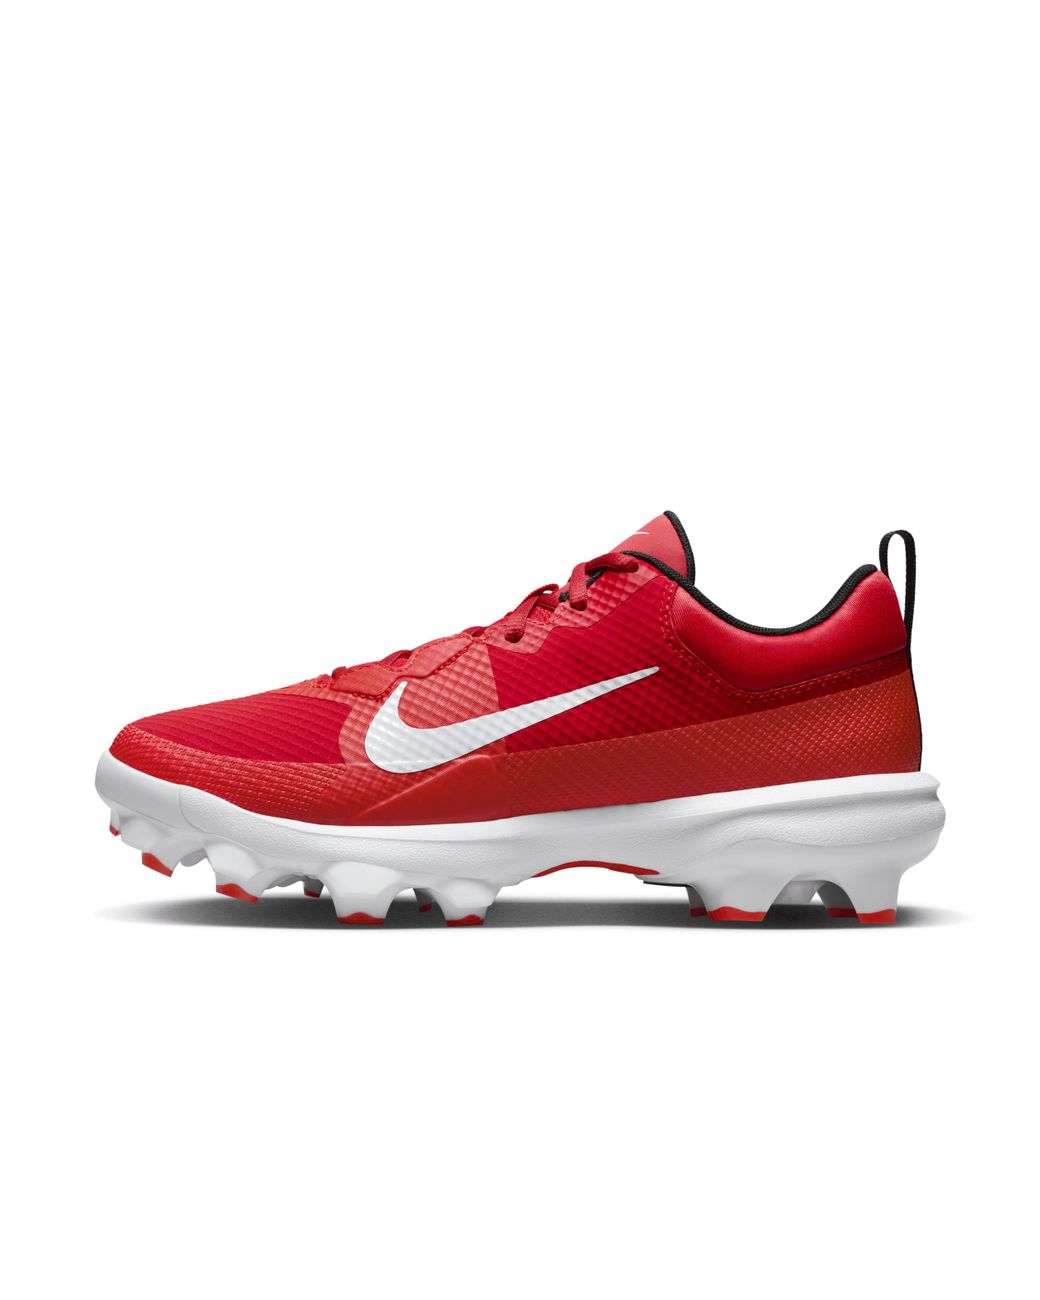 What Pros Wear: Now Available: Mike Trout's Nike Force Zoom Trout 8 Elite  Baseball Cleats - What Pros Wear